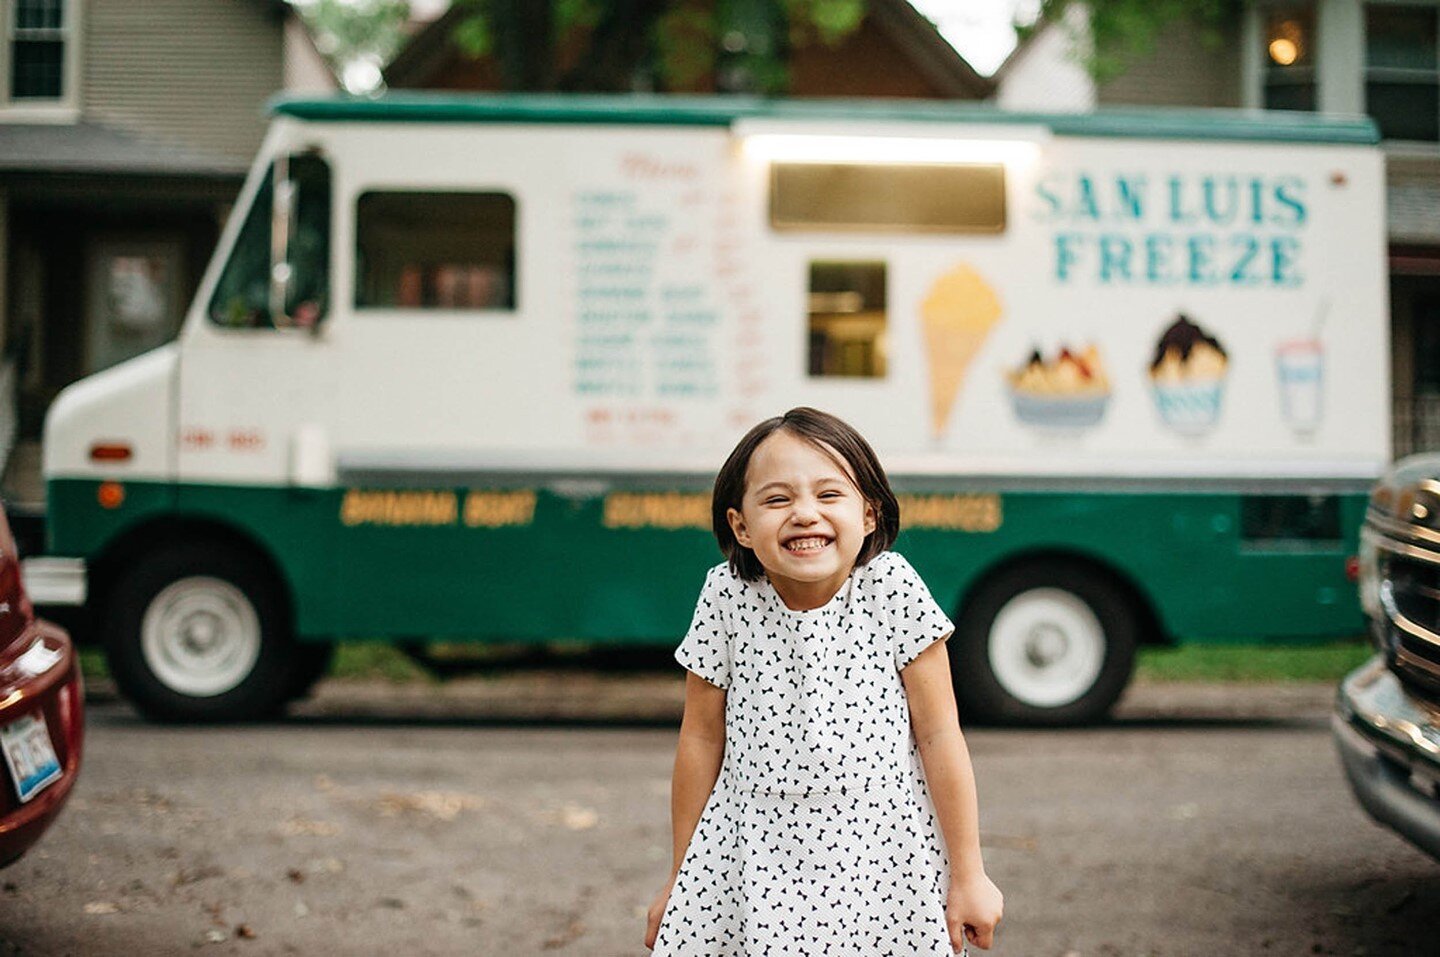 OK...I know the world is right in the middle of crazy town recently, but can we for a second just appreciate that we all were kids once, and that we probably all got just as excited as this little one about ice cream?⁠
.⁠
.⁠
.⁠
.#familyphotography #f